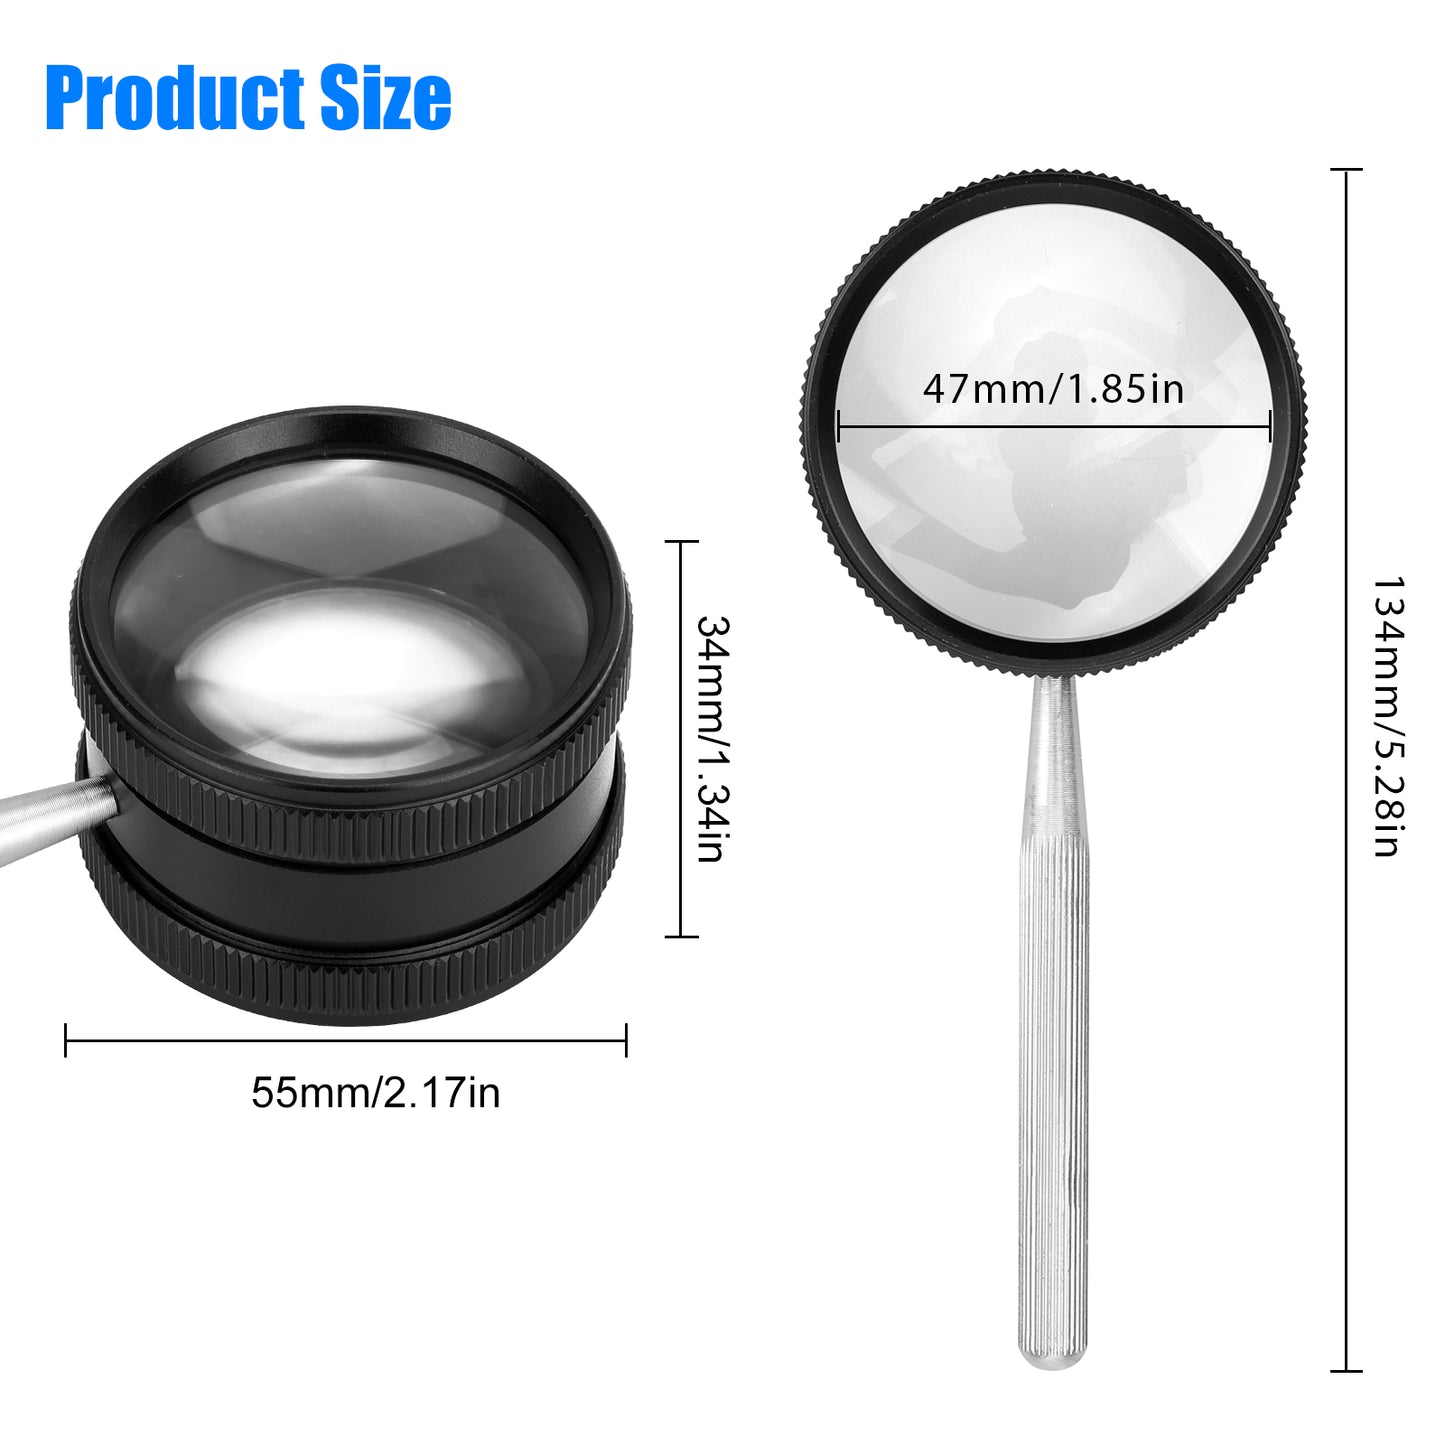 Hand Held Magnifier - High Quality and Multifunctional for Clear Magnification